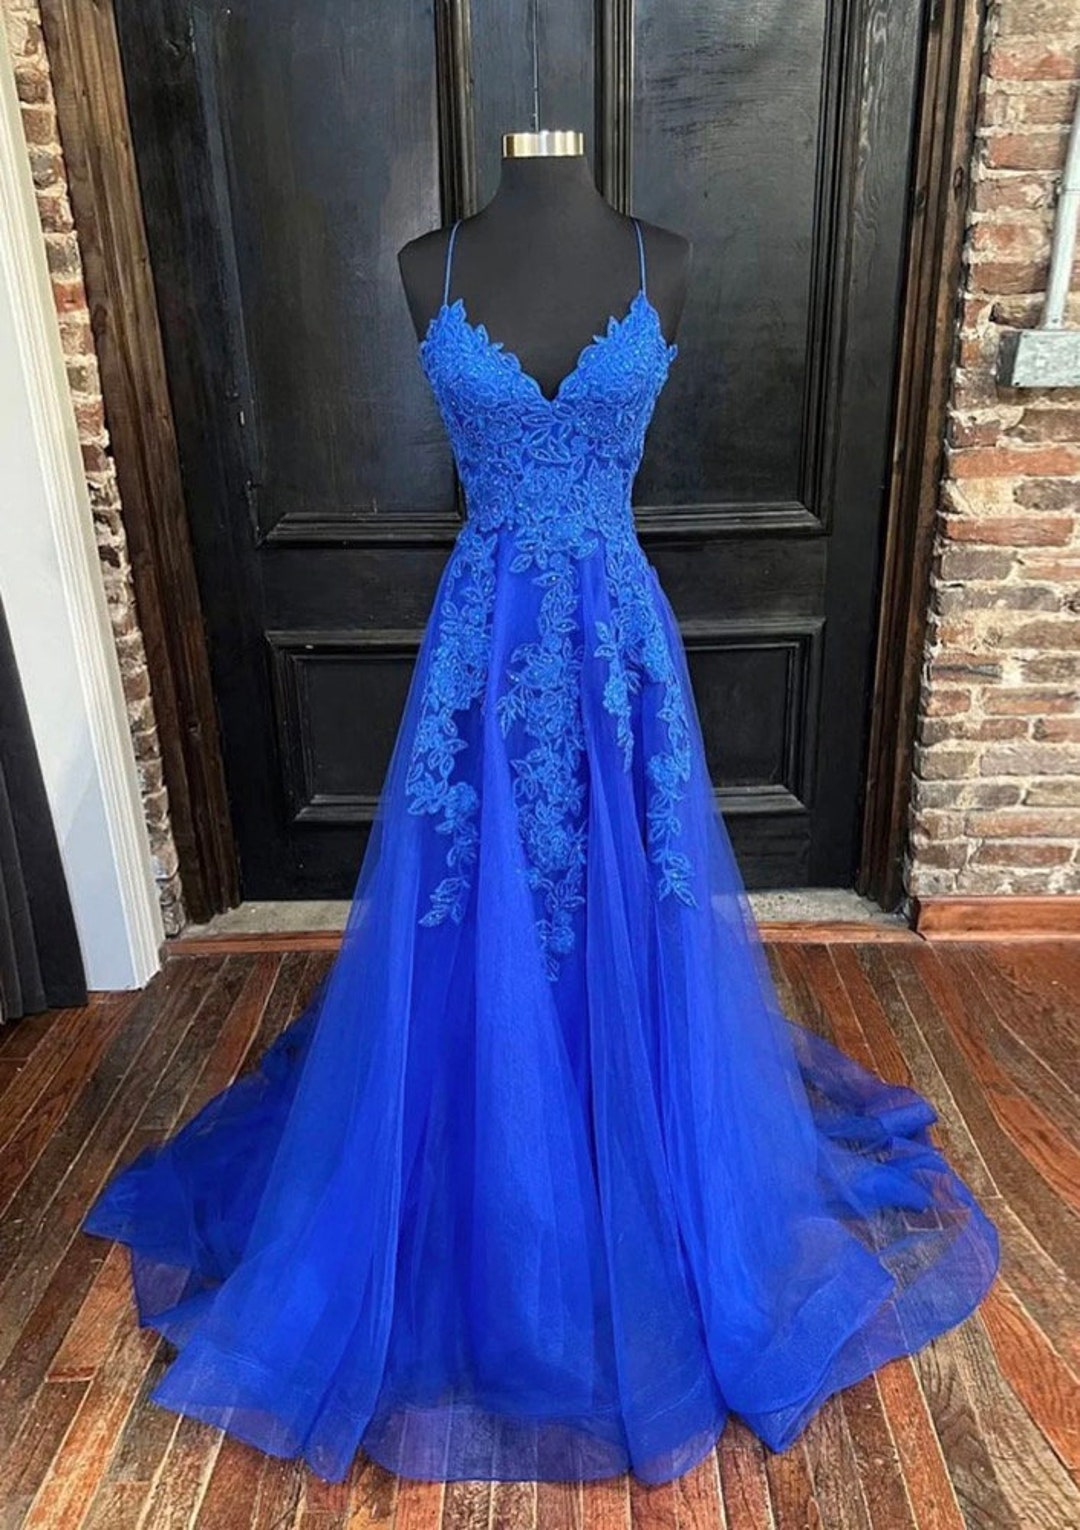 Royal Blue Long Sleeves Wedding Dresses 2018 for Women Lace up High Neck  Floor Length Lace Pearls Ball Gowns Puffy Bridal Gowns - OnshopDeals.Com